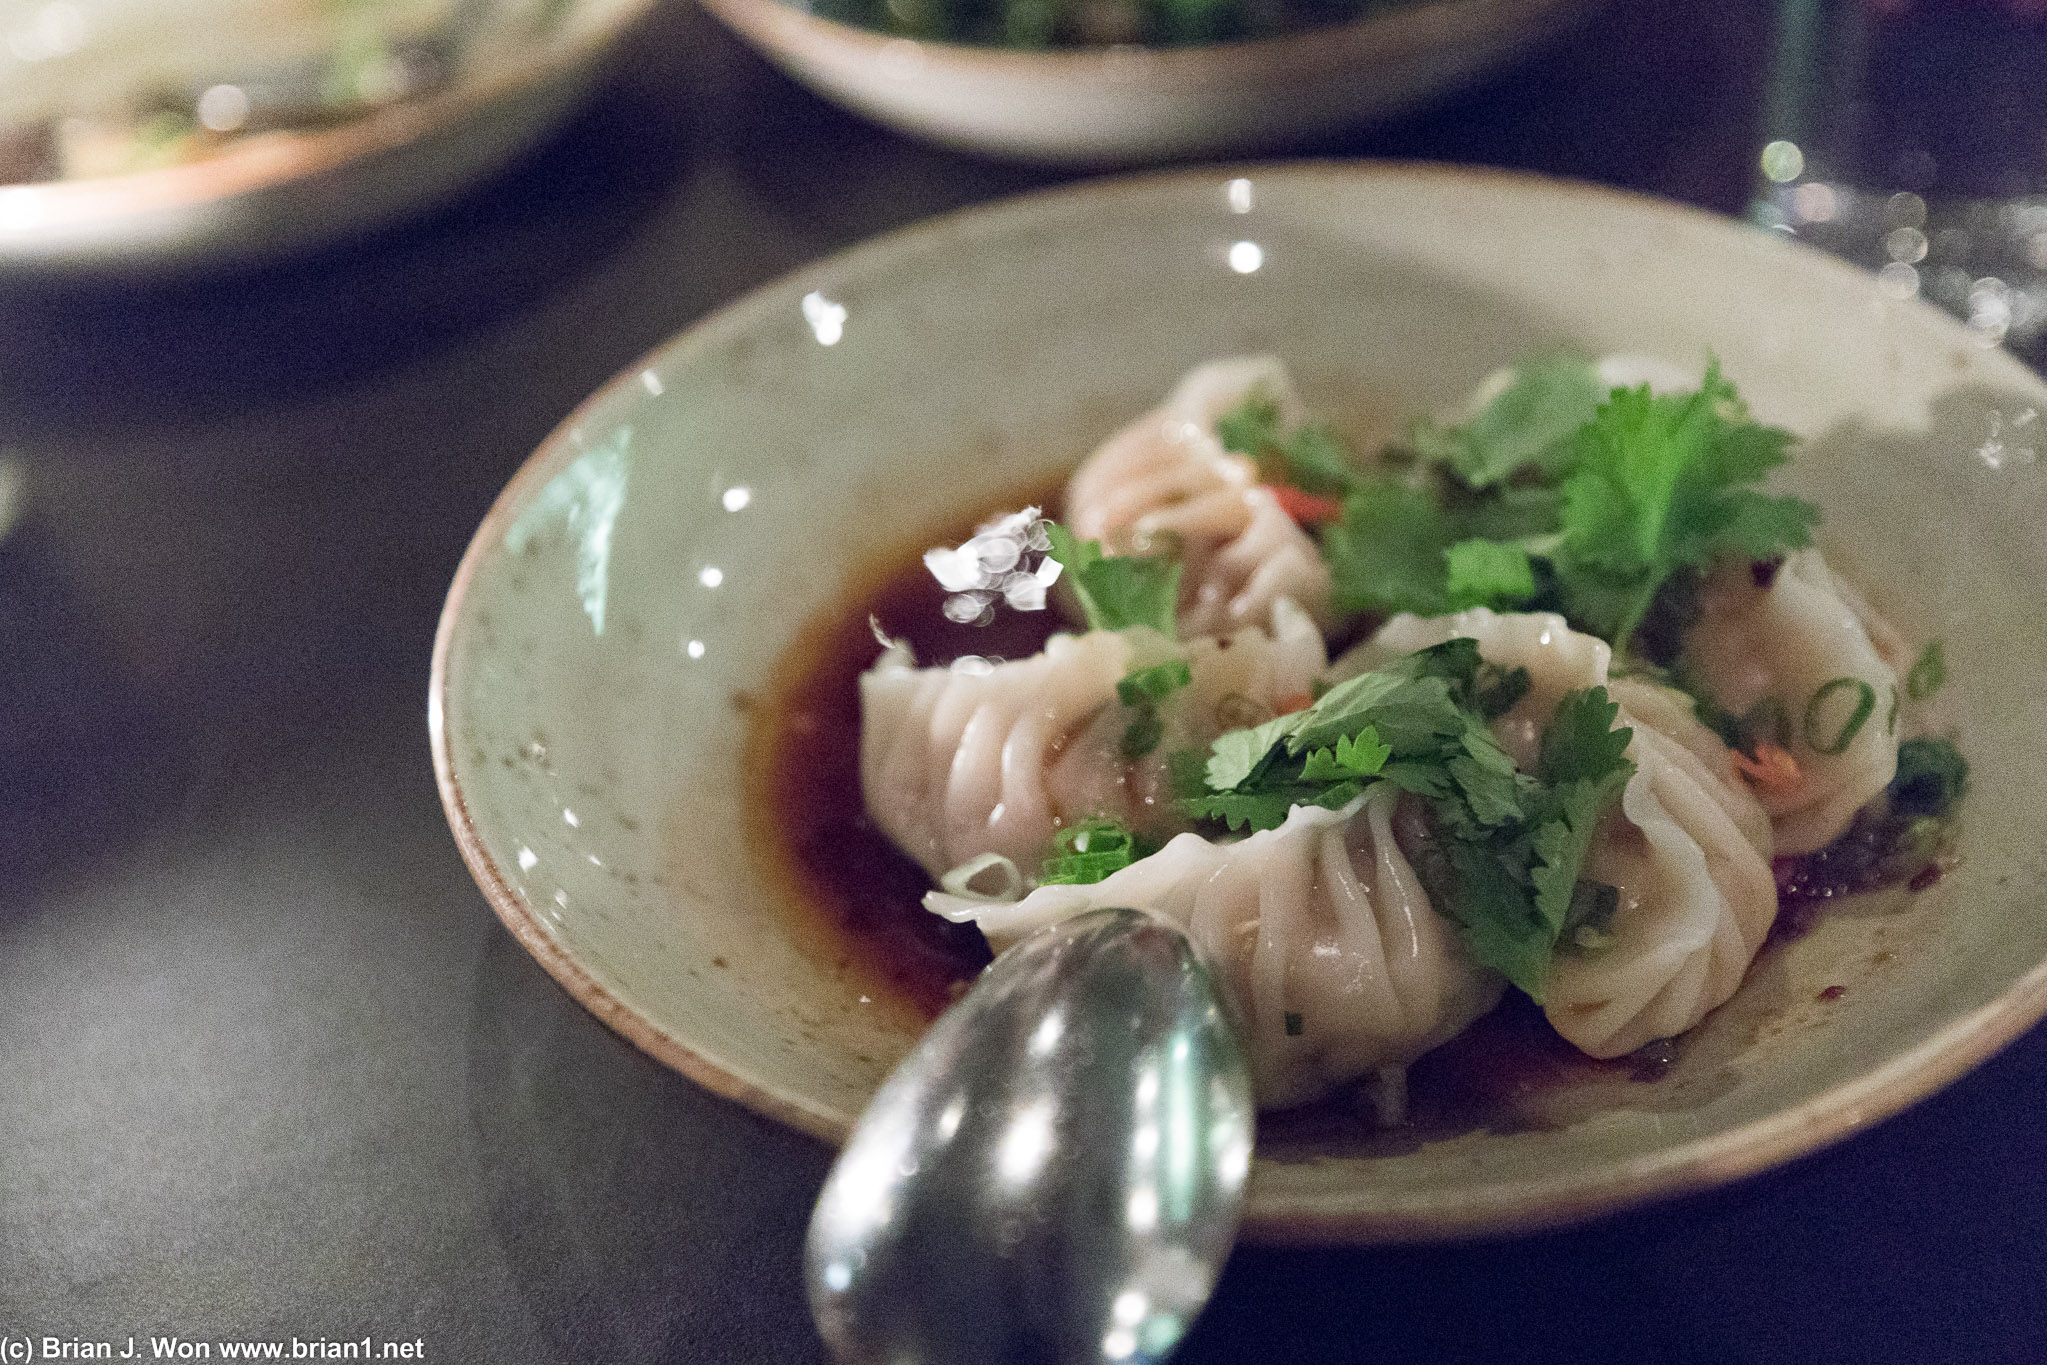 Pork and cabbage dumplings. Could have eaten a few orders of these.